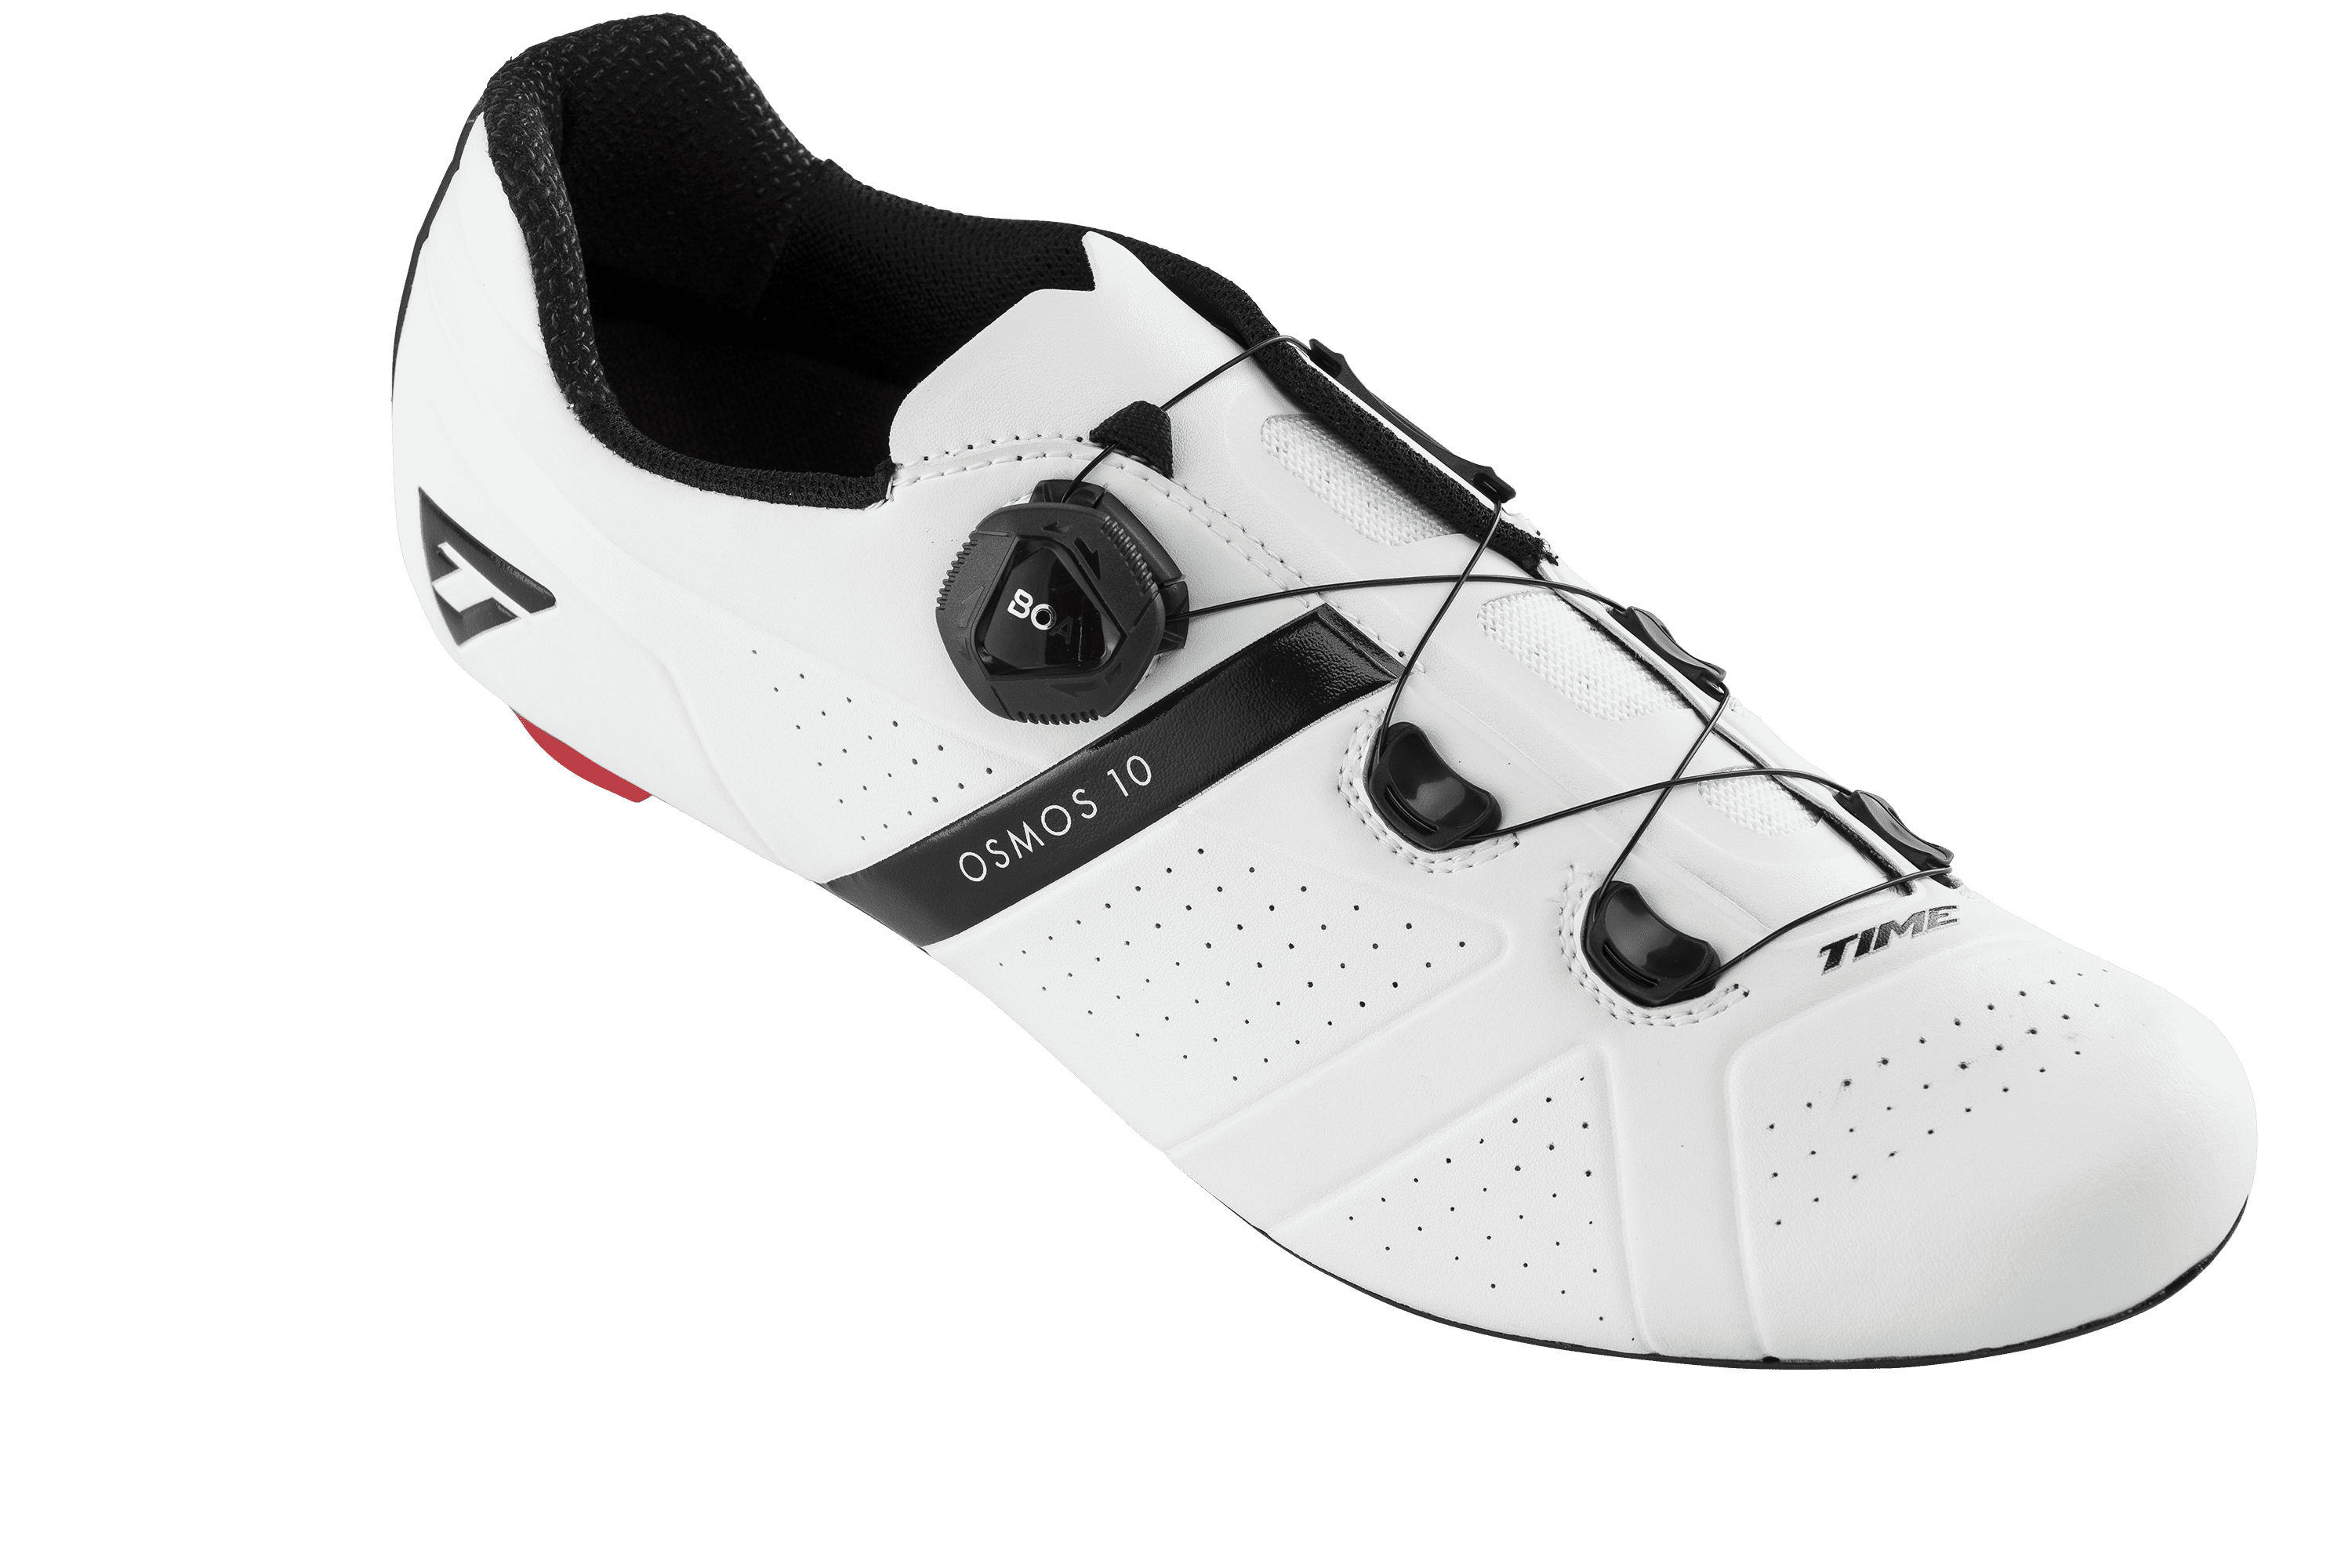 time osmos cycling shoes